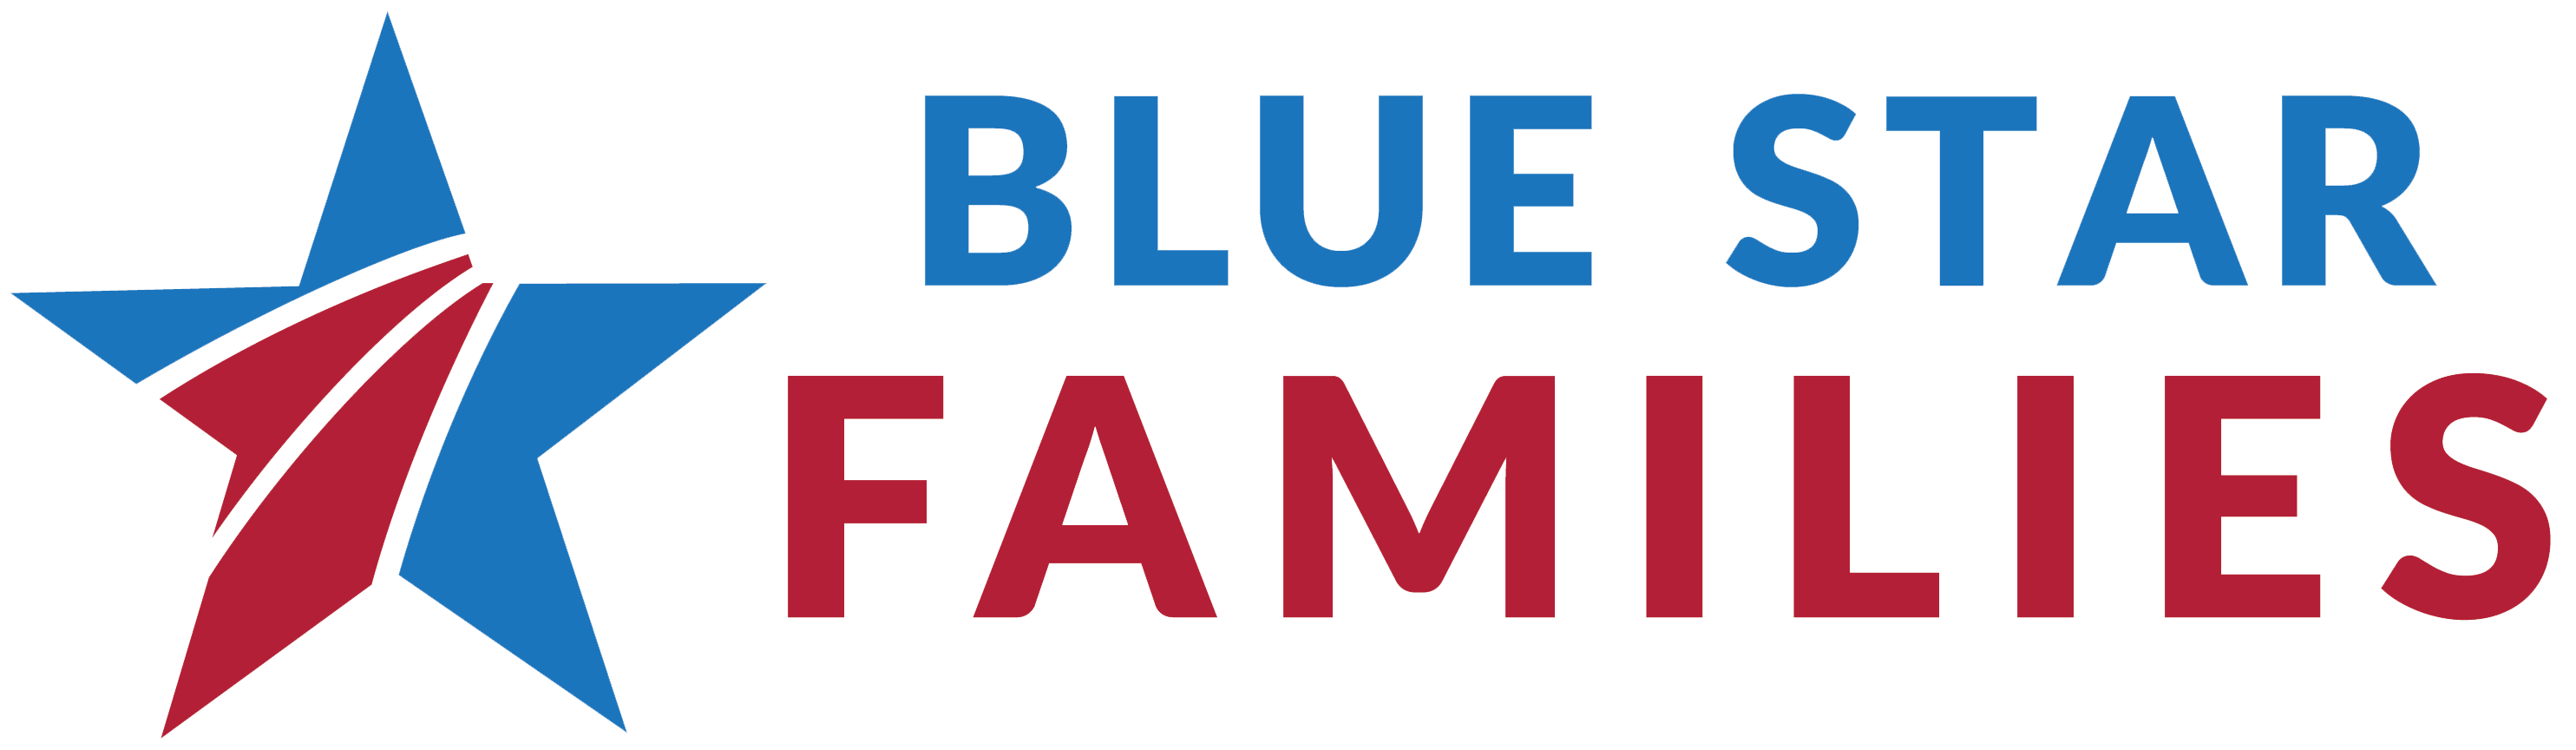 Star Family Logo - National Park Trust and Blue Star Families Announce New Partnership ...